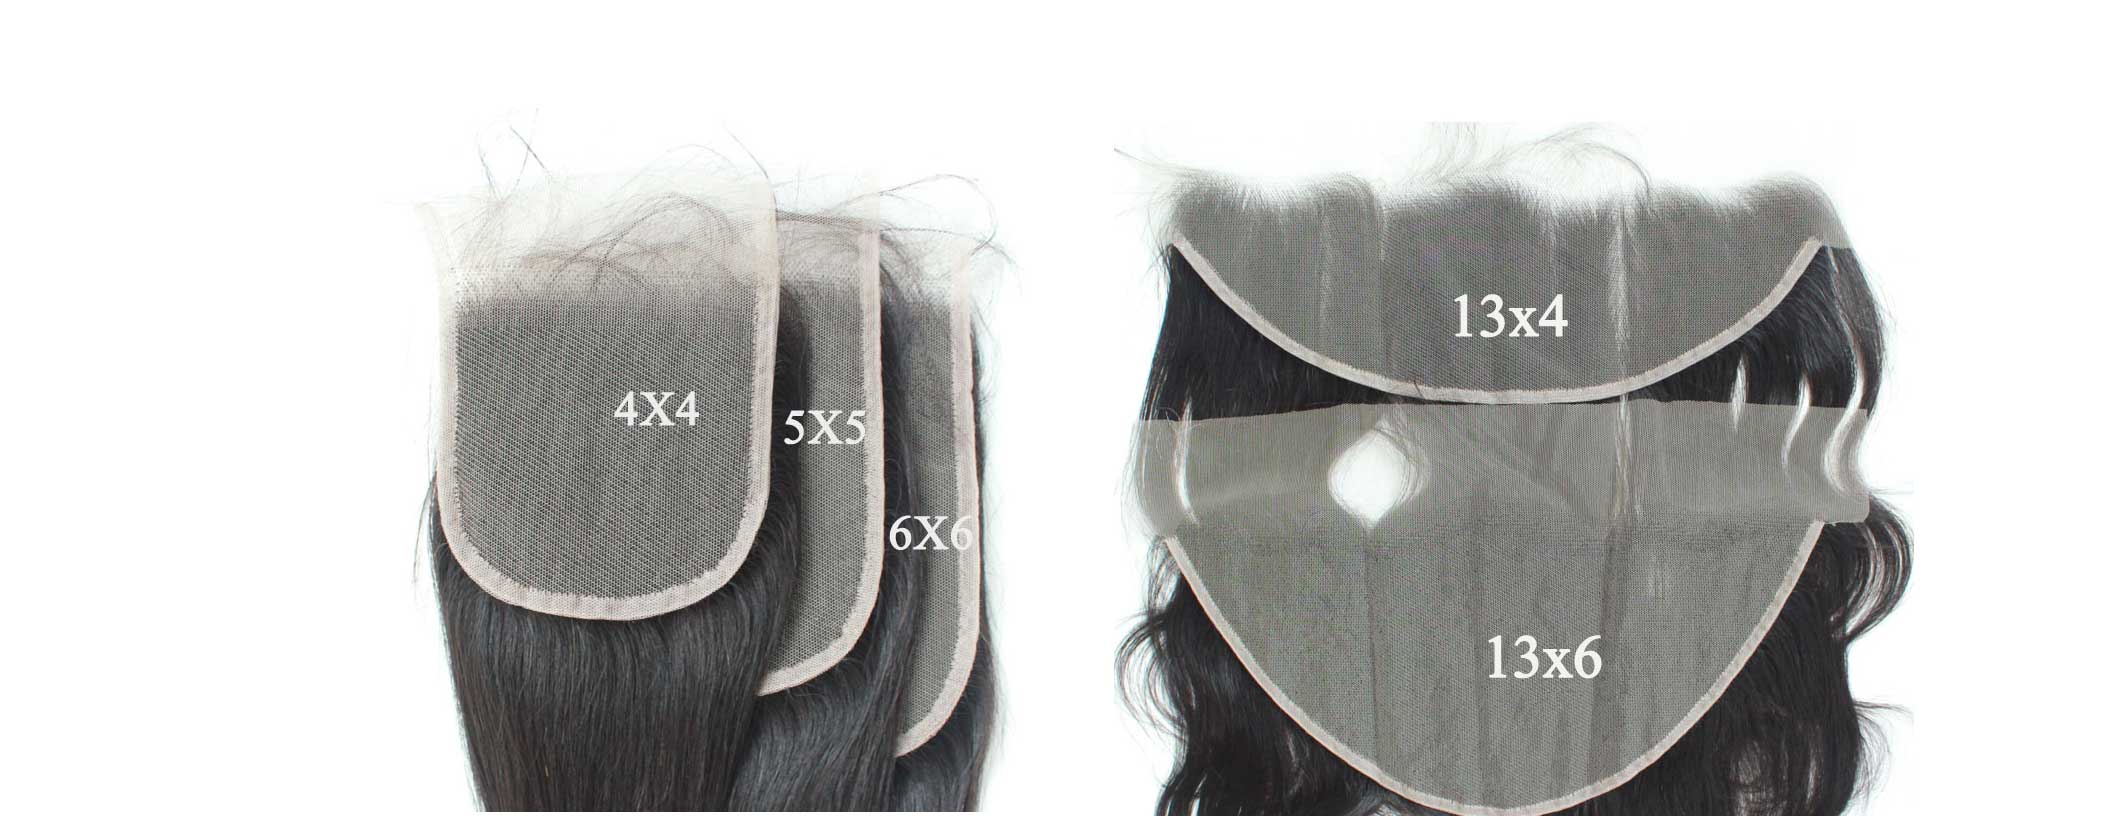 New Arrival : HD Lace Closure 4X4 5X5 66 13X4 13X6 and 2X6